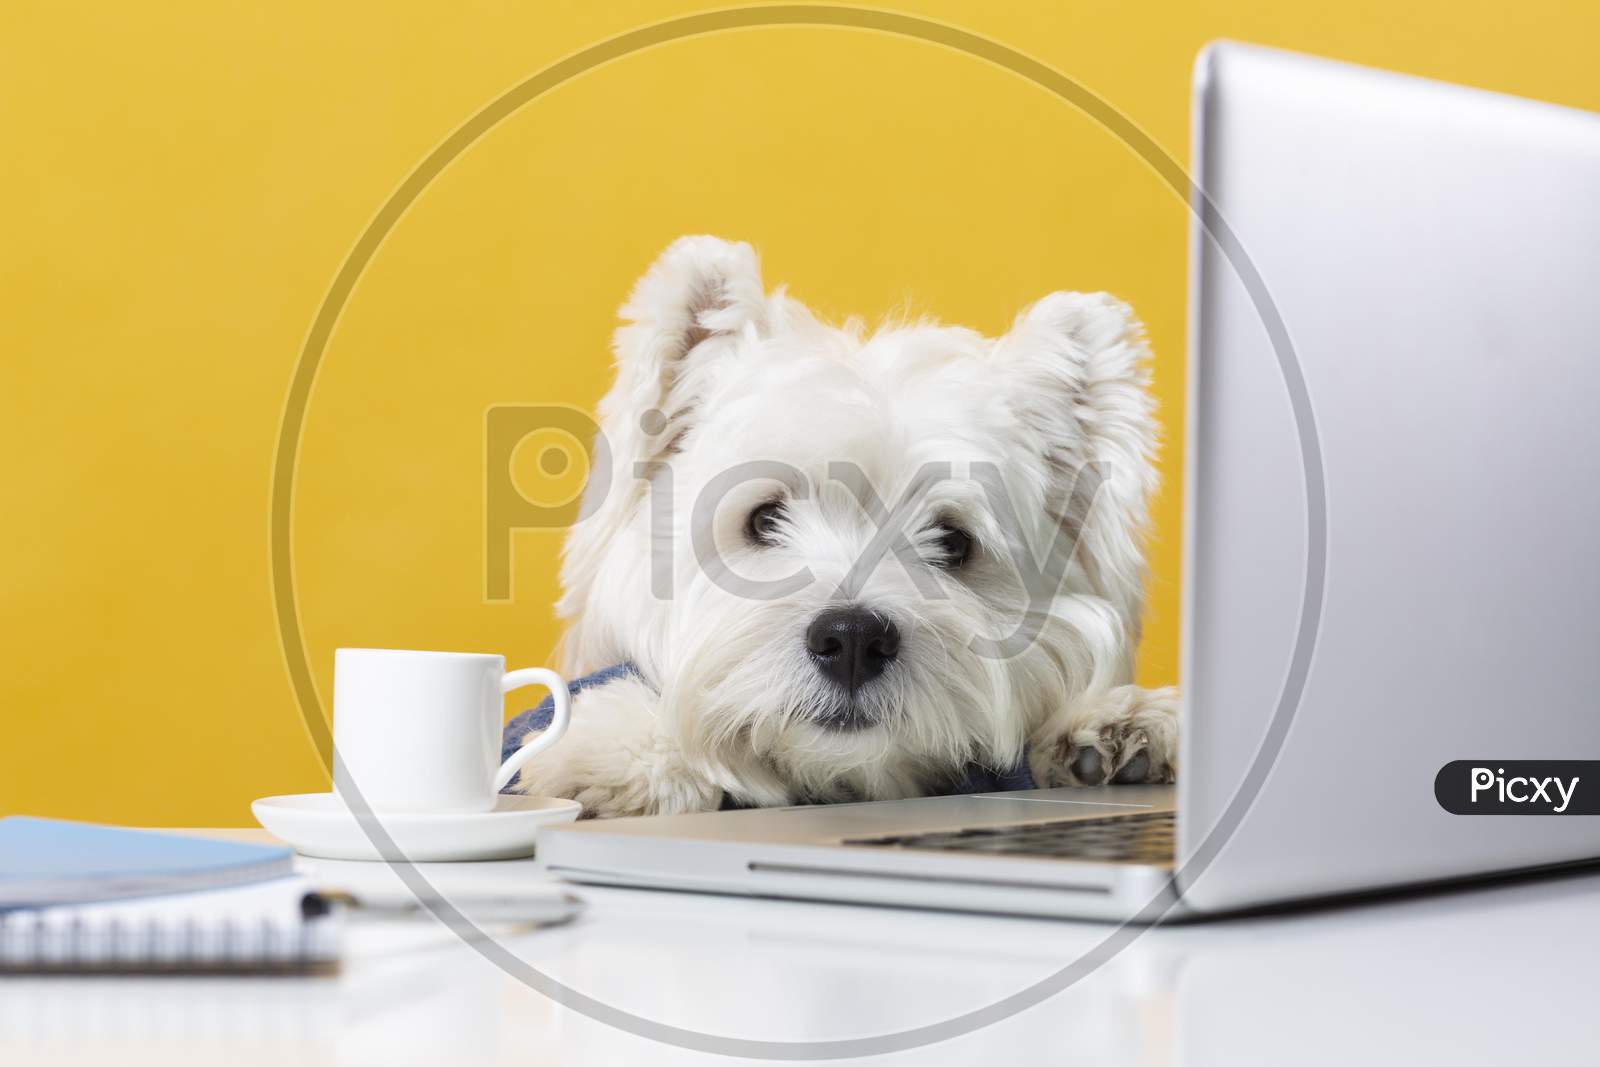 Cute little dog impersonating a business person, dog with laptop